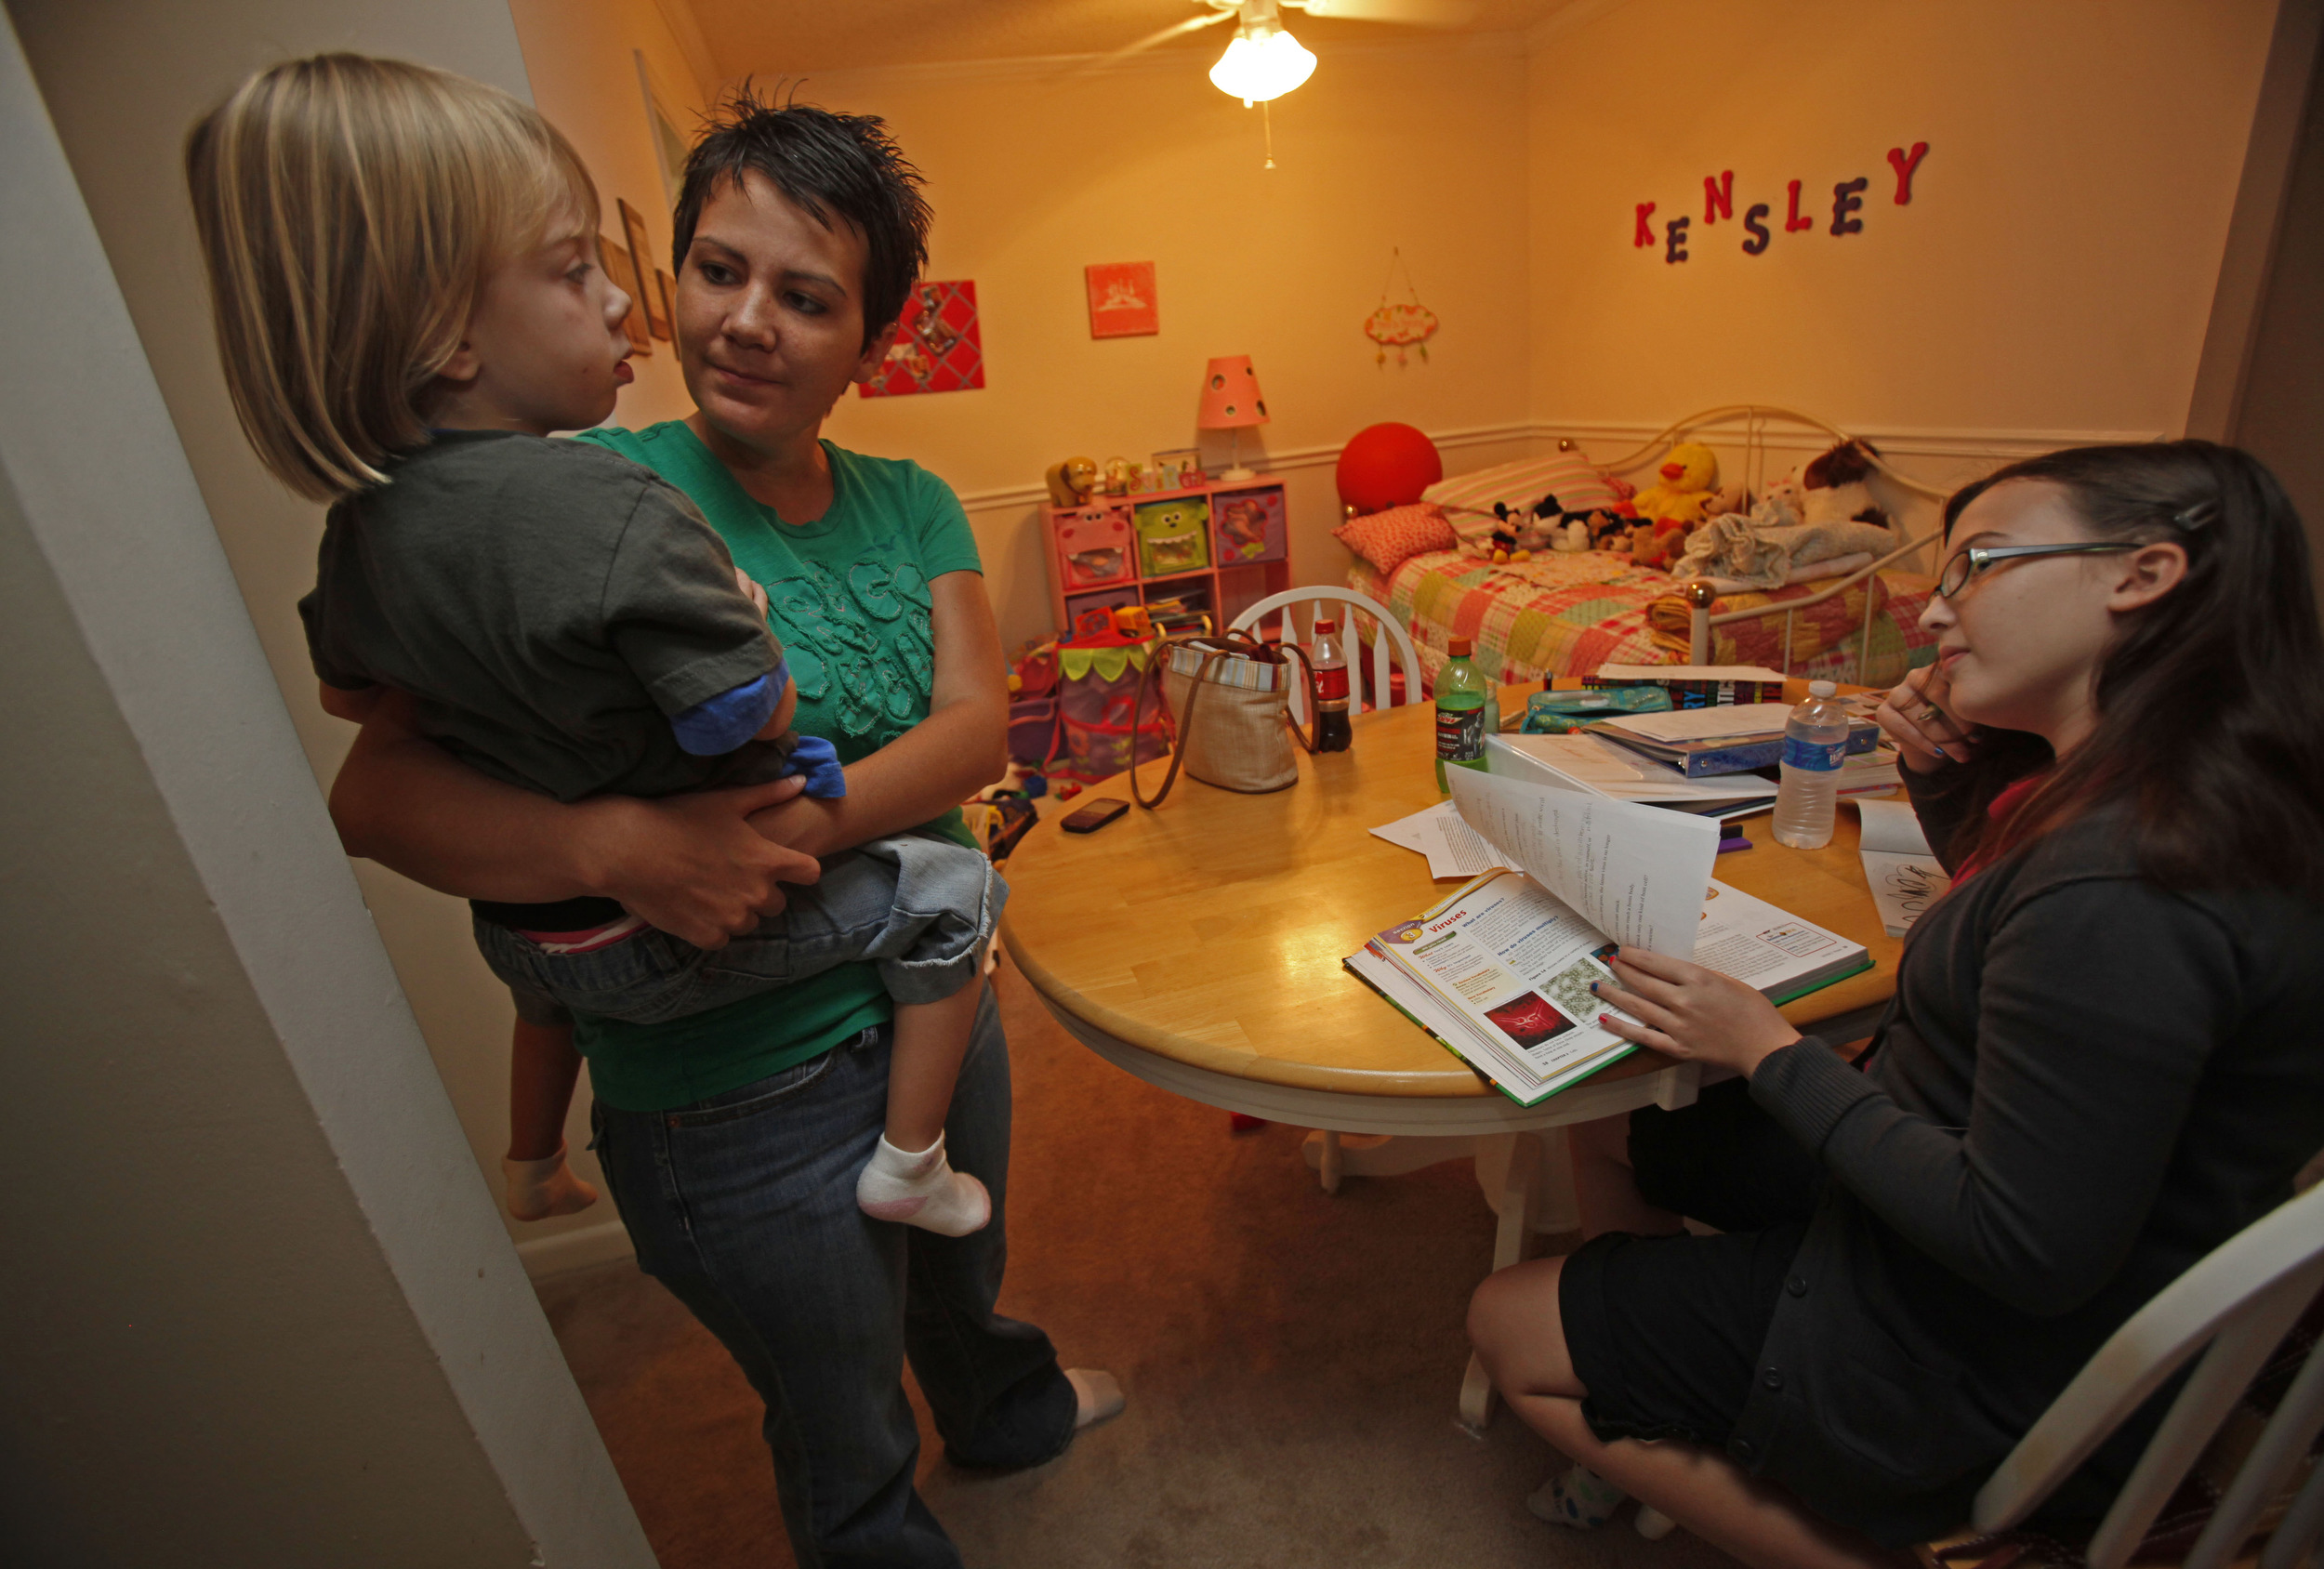  Lori Harrington and daughters Jasey, 12, and Kensley, 4, spend evenings around the kitchen table in their small apartment September 8, 2010 in Nashville, Tenn. Harrington moved to an apartment and left her job due to the stress of recovering from th